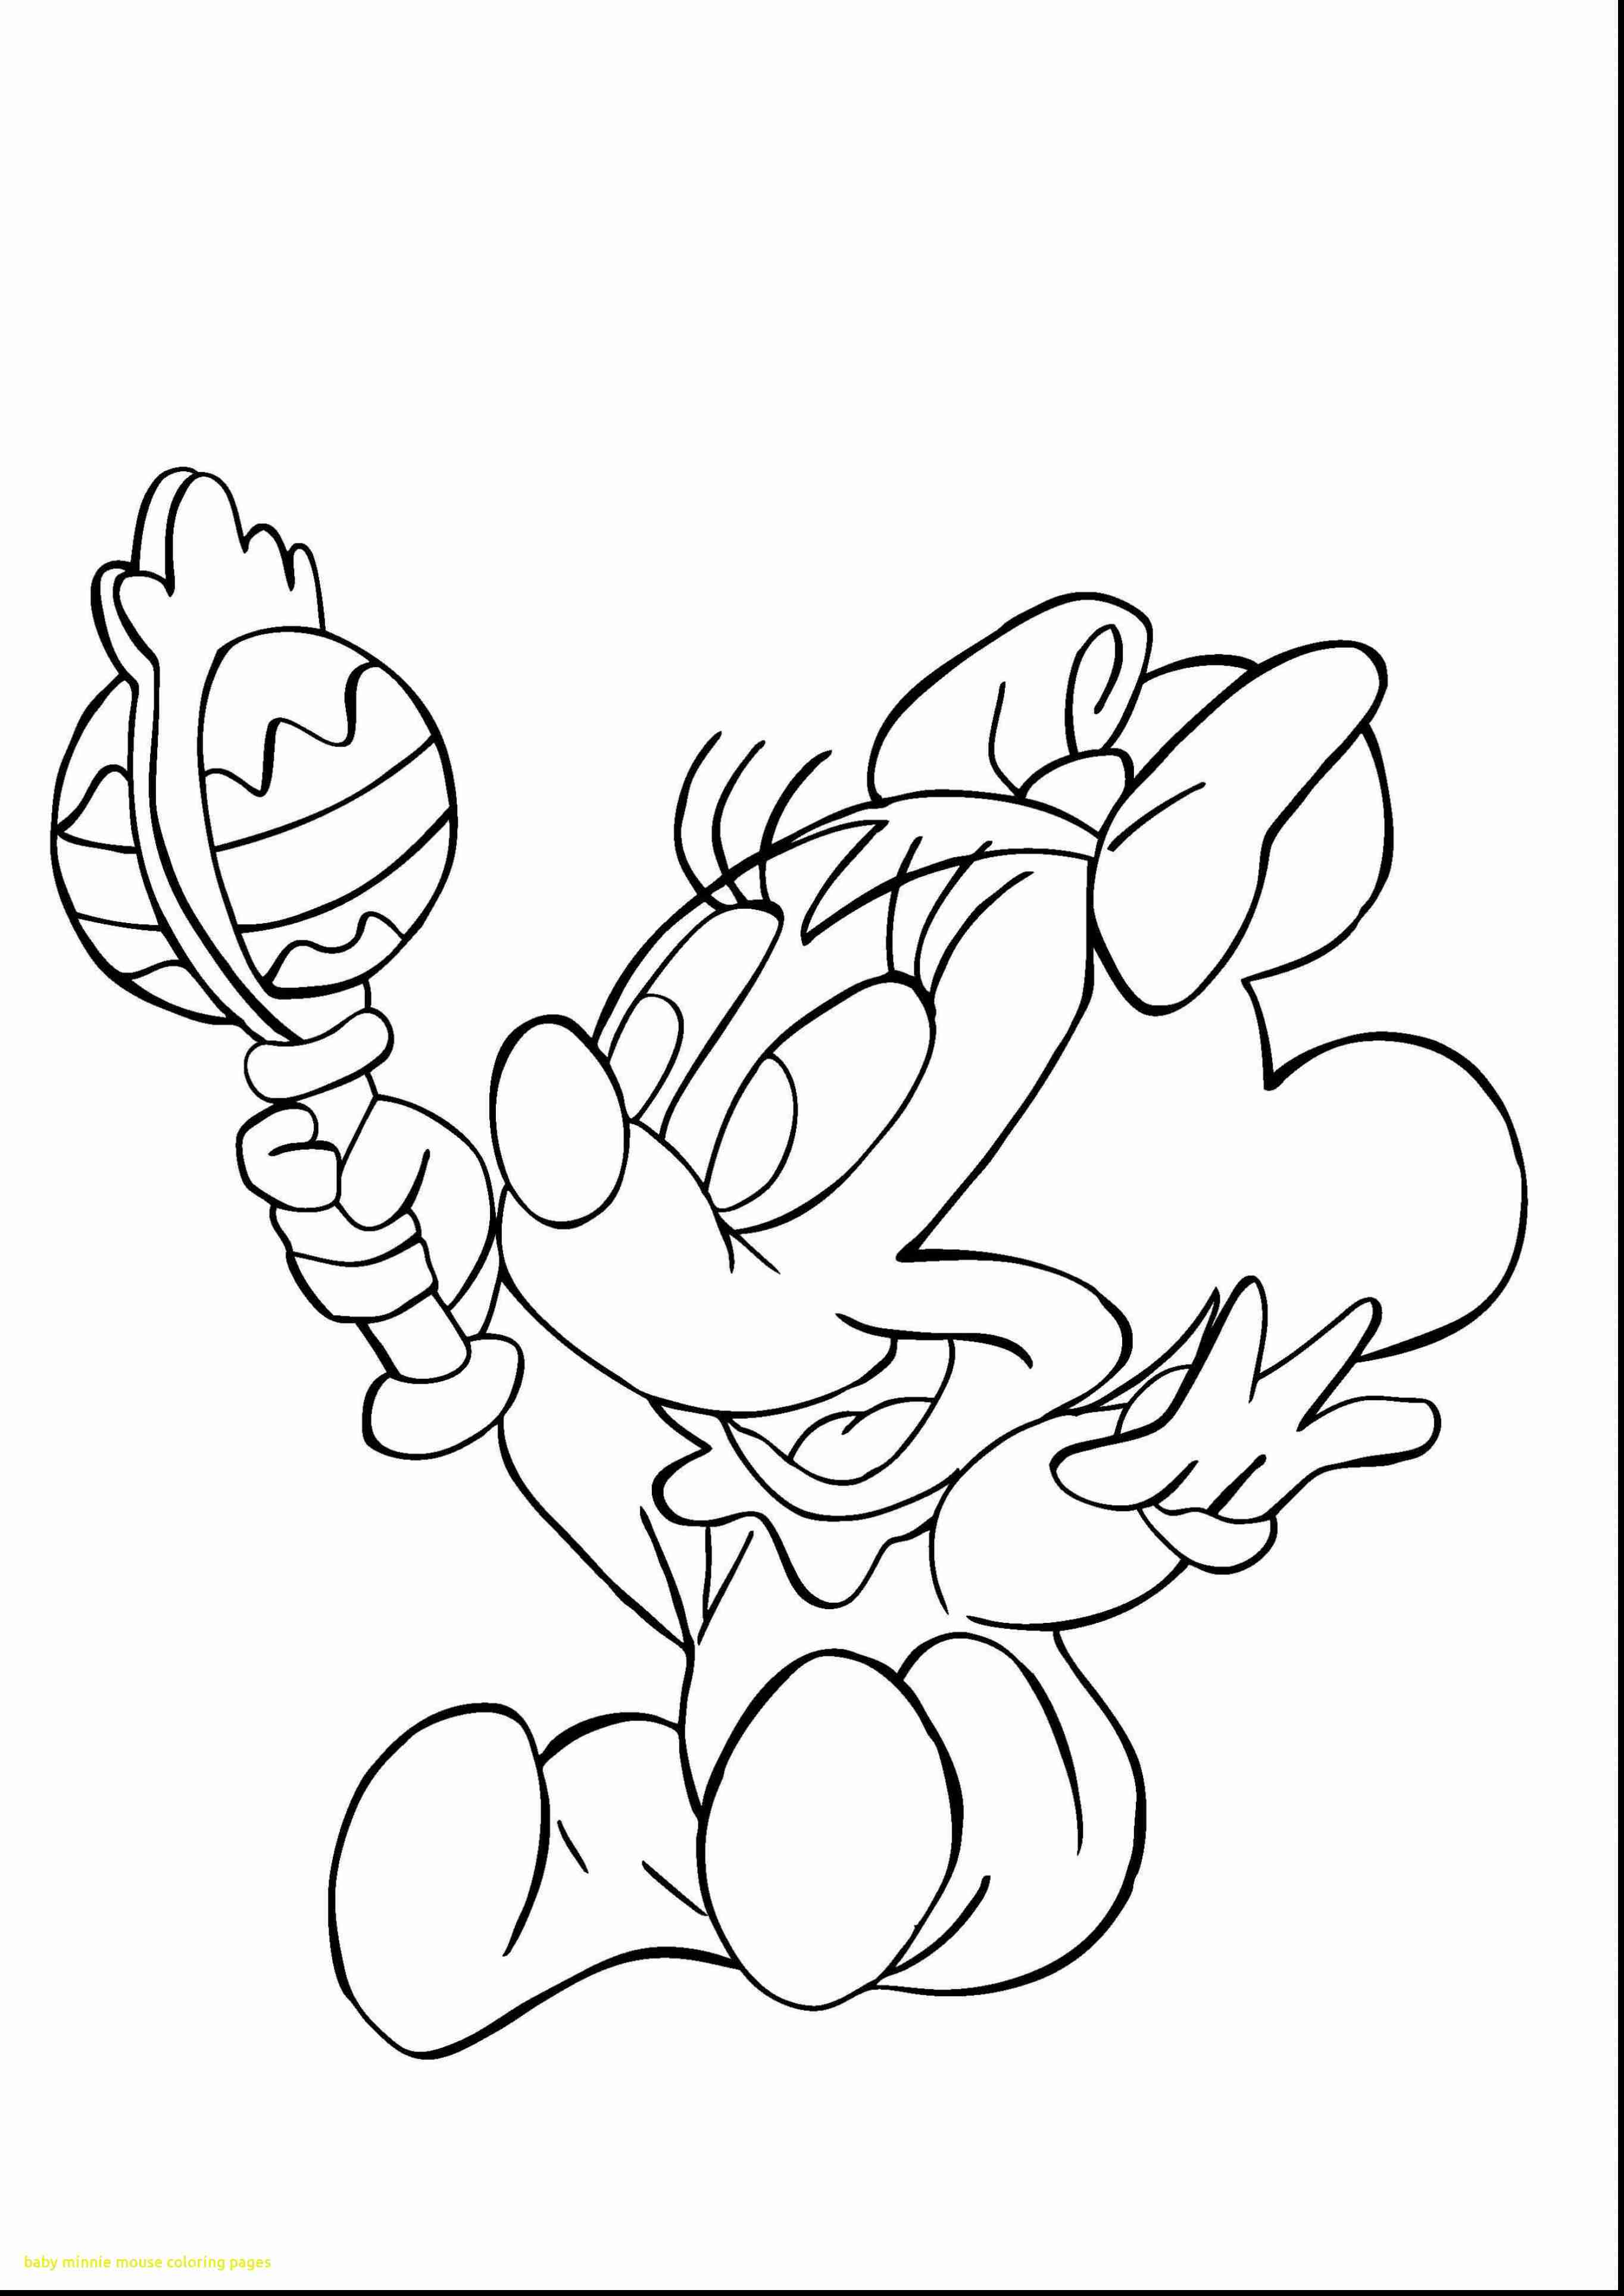 Cool Mickey Mouse Coloring Pages Printables 42